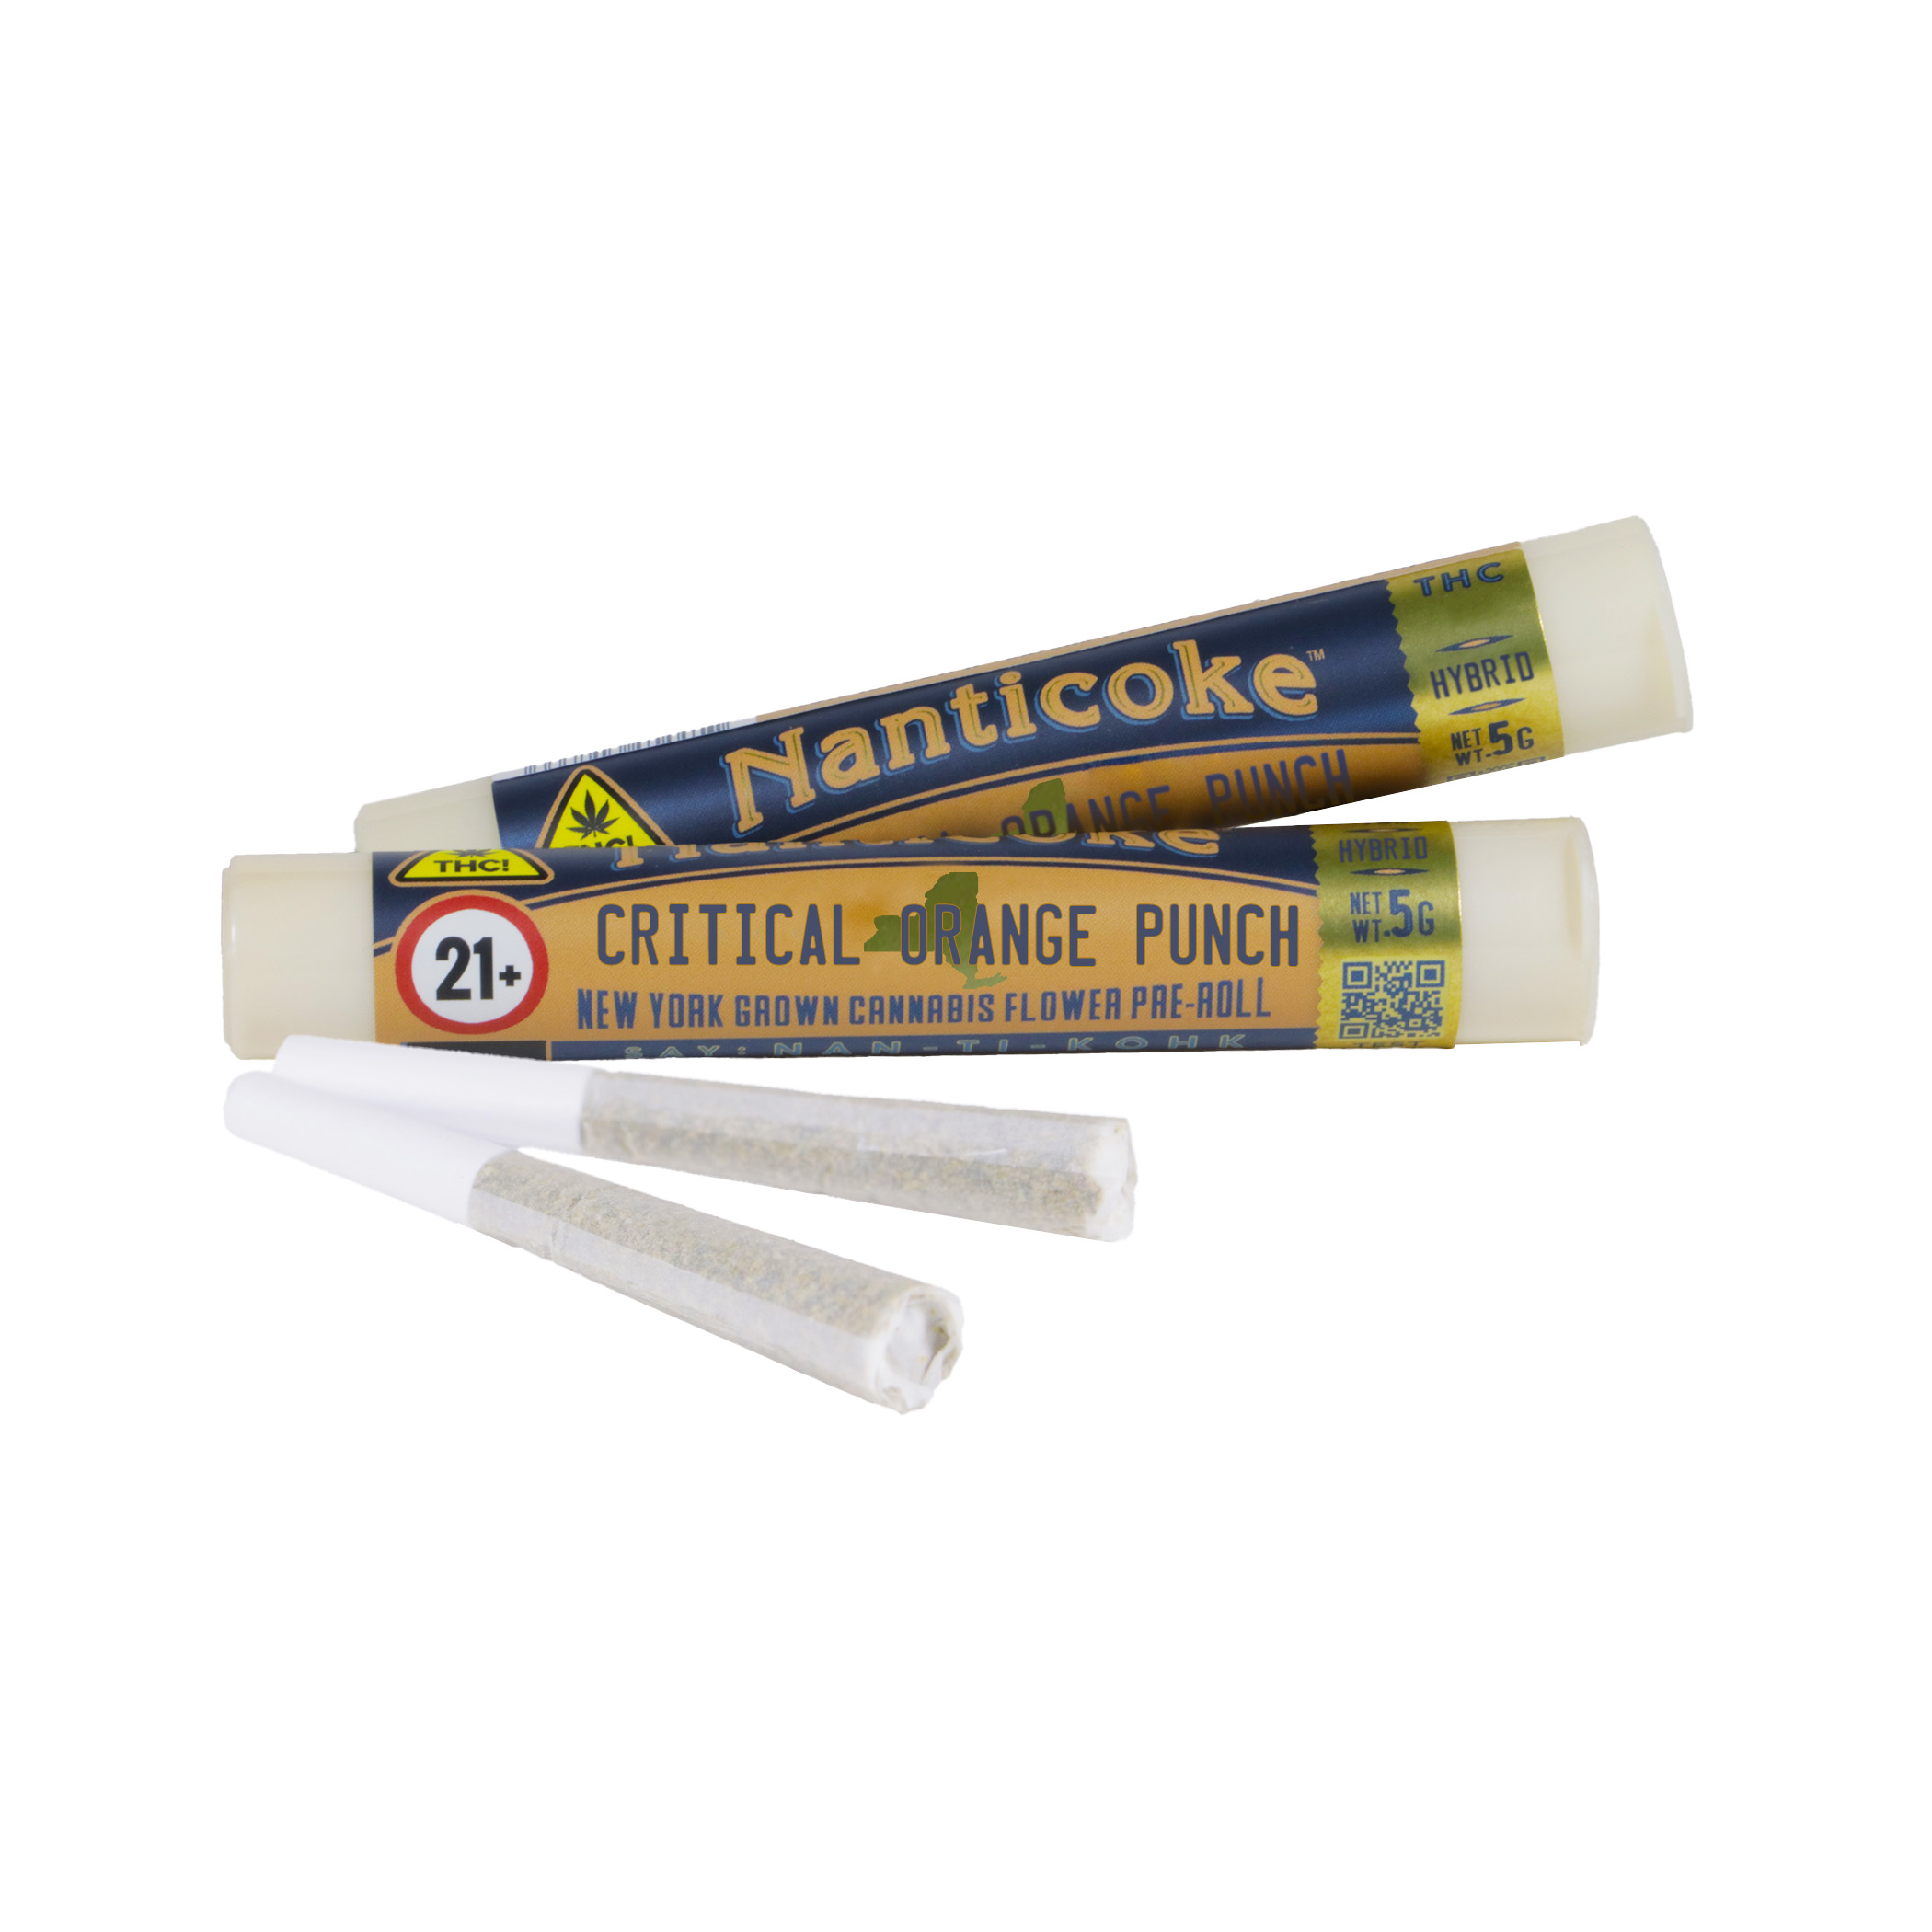 Critical Orange Punch Pre-Roll Joints Label